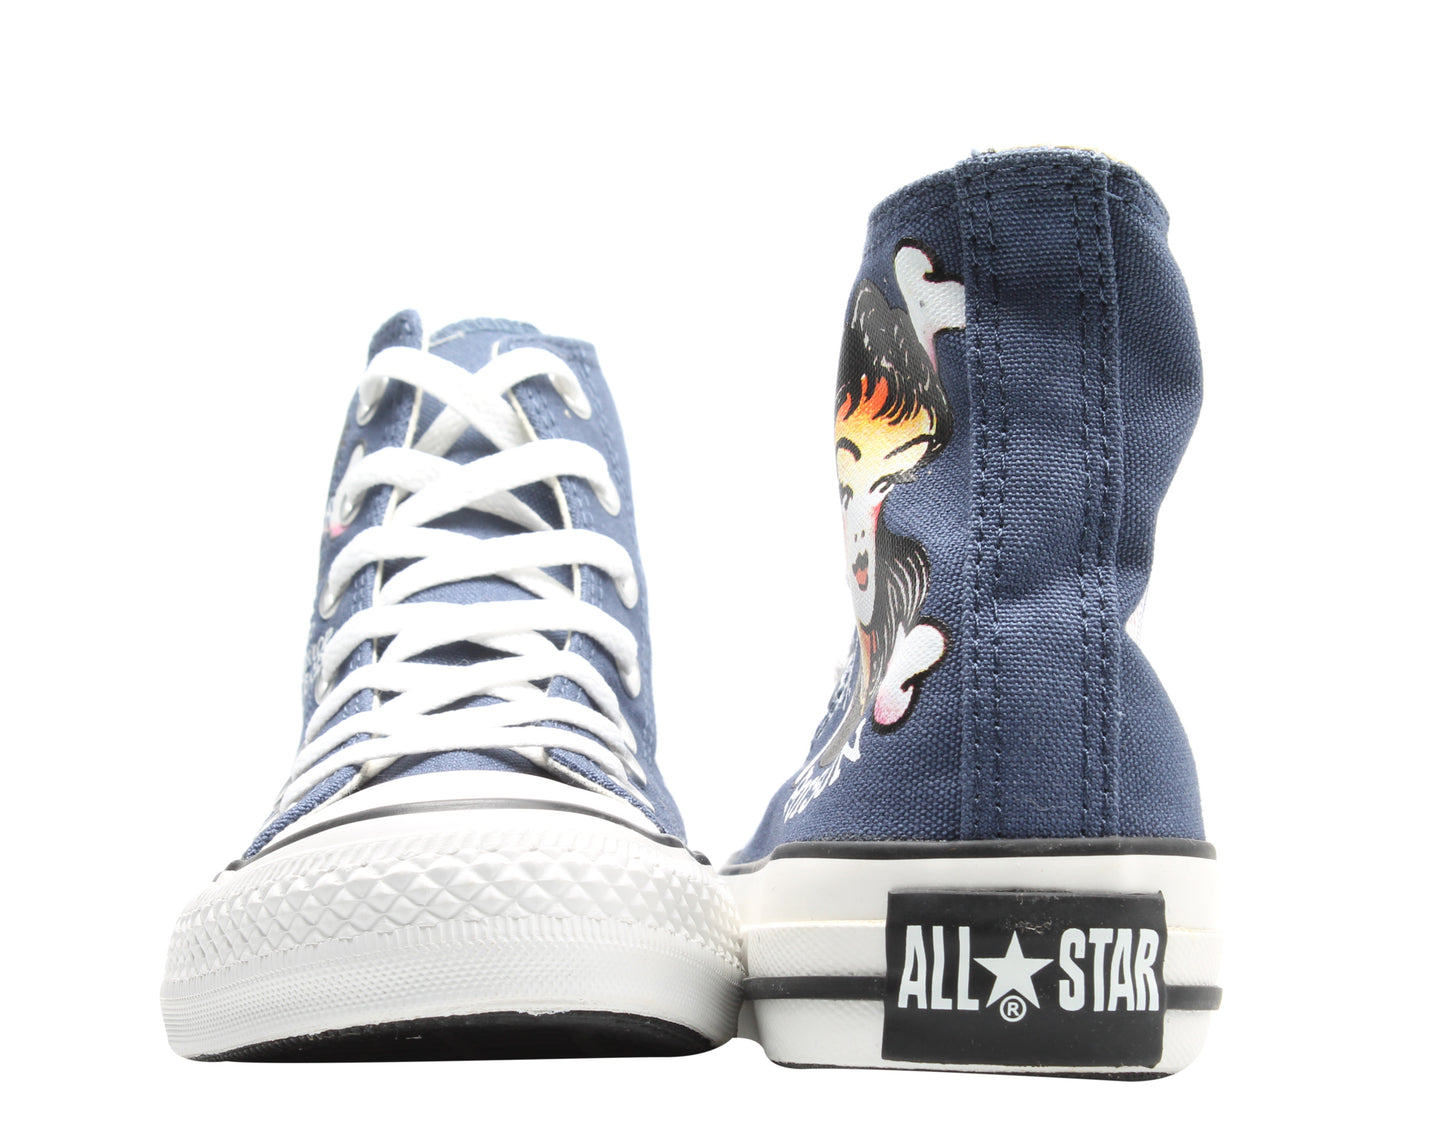 Converse Chuck Taylor All Star Sailor Jerry Poison Girl Navy High Top Sneakers 1Y814